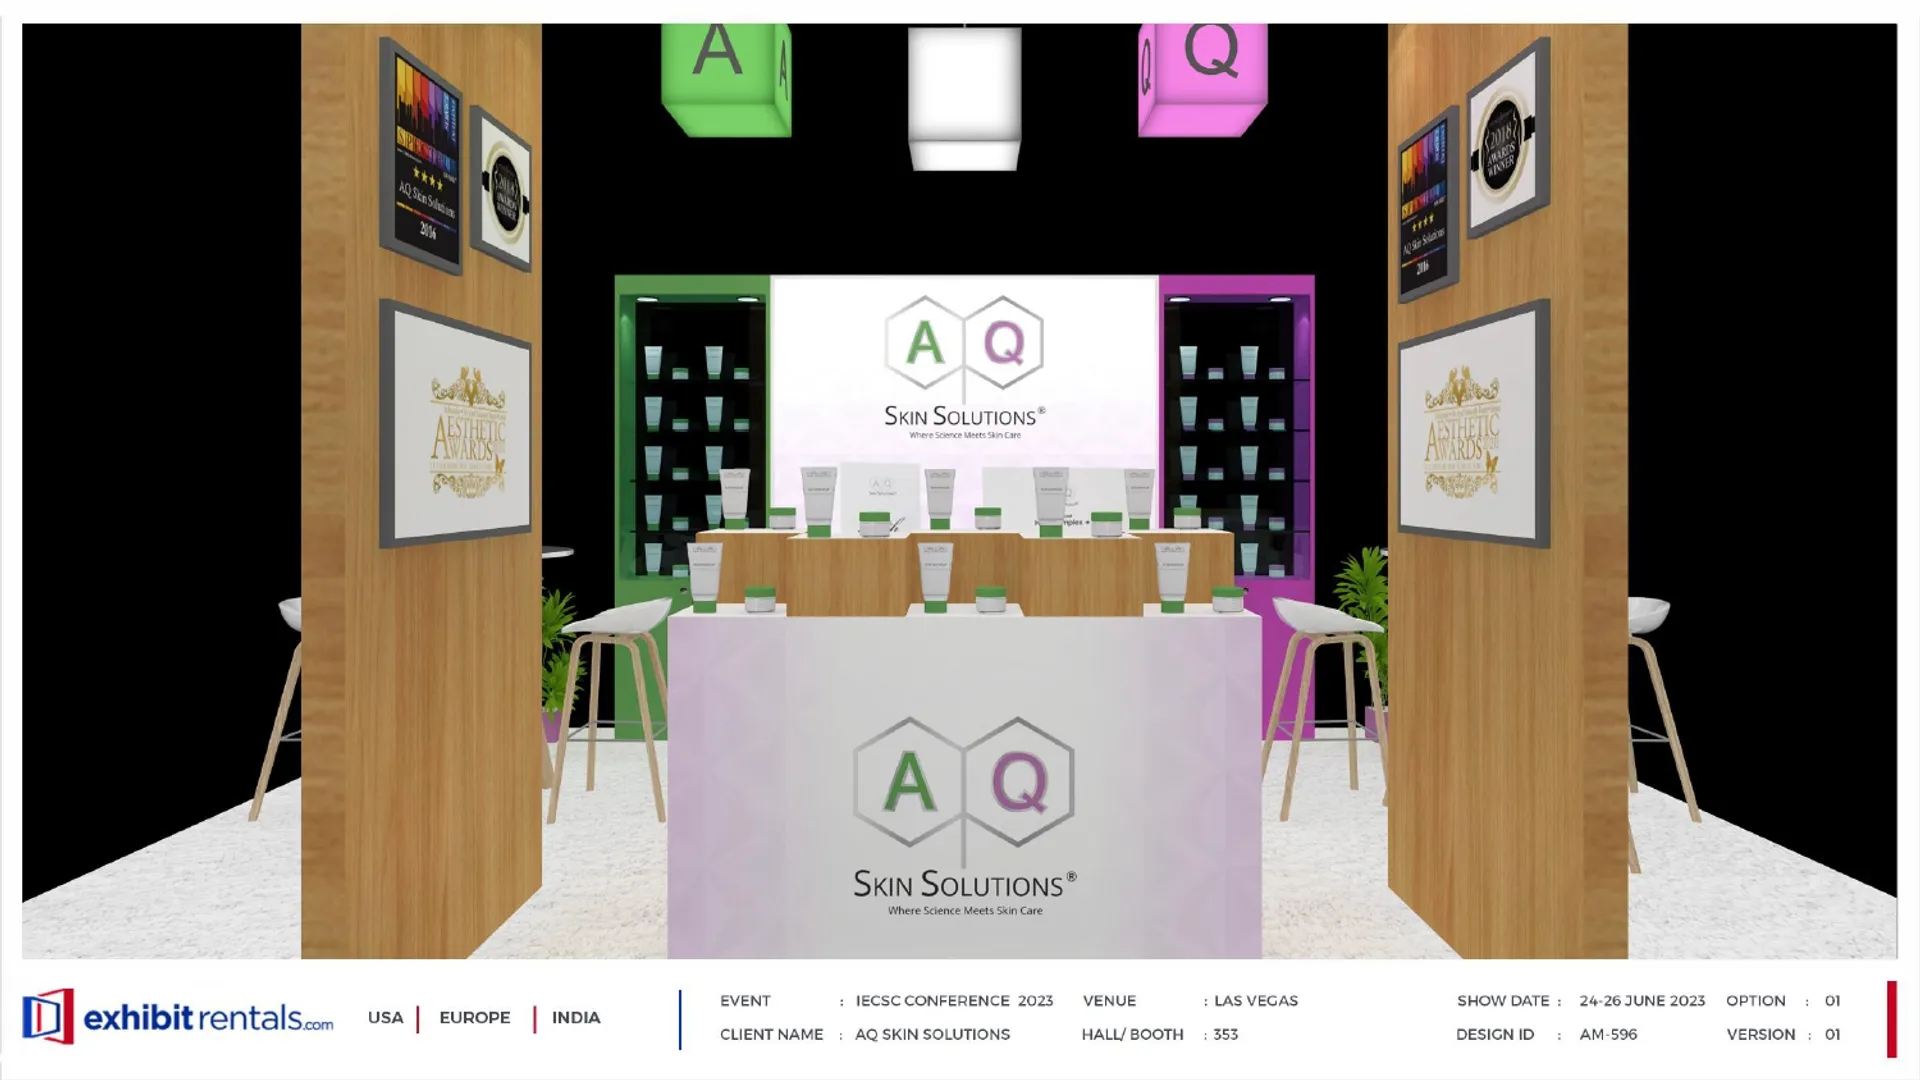 booth-design-projects/Exhibit-Rentals/2024-04-18-20x20-ISLAND-Project-85/1.1_AQ Skin Solutions_IECSC Conference_ER design proposal -22_page-0001-w9qbaf.jpg